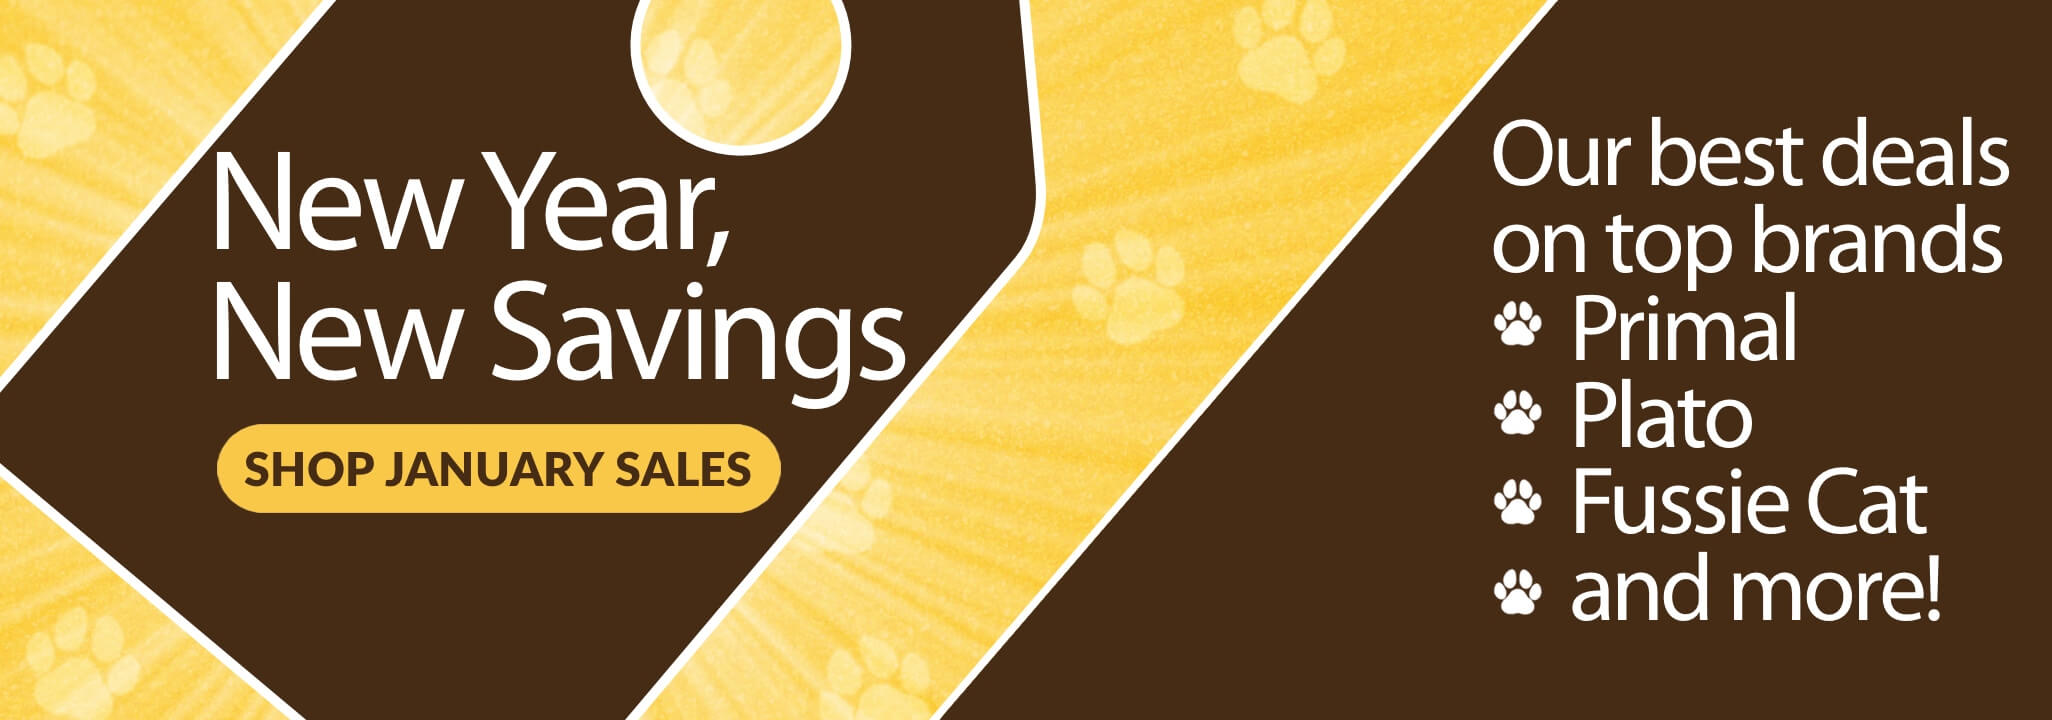 New Year New Savings Shop January Sales Our best deals on top brands Plato Primal Fussie Cat and More